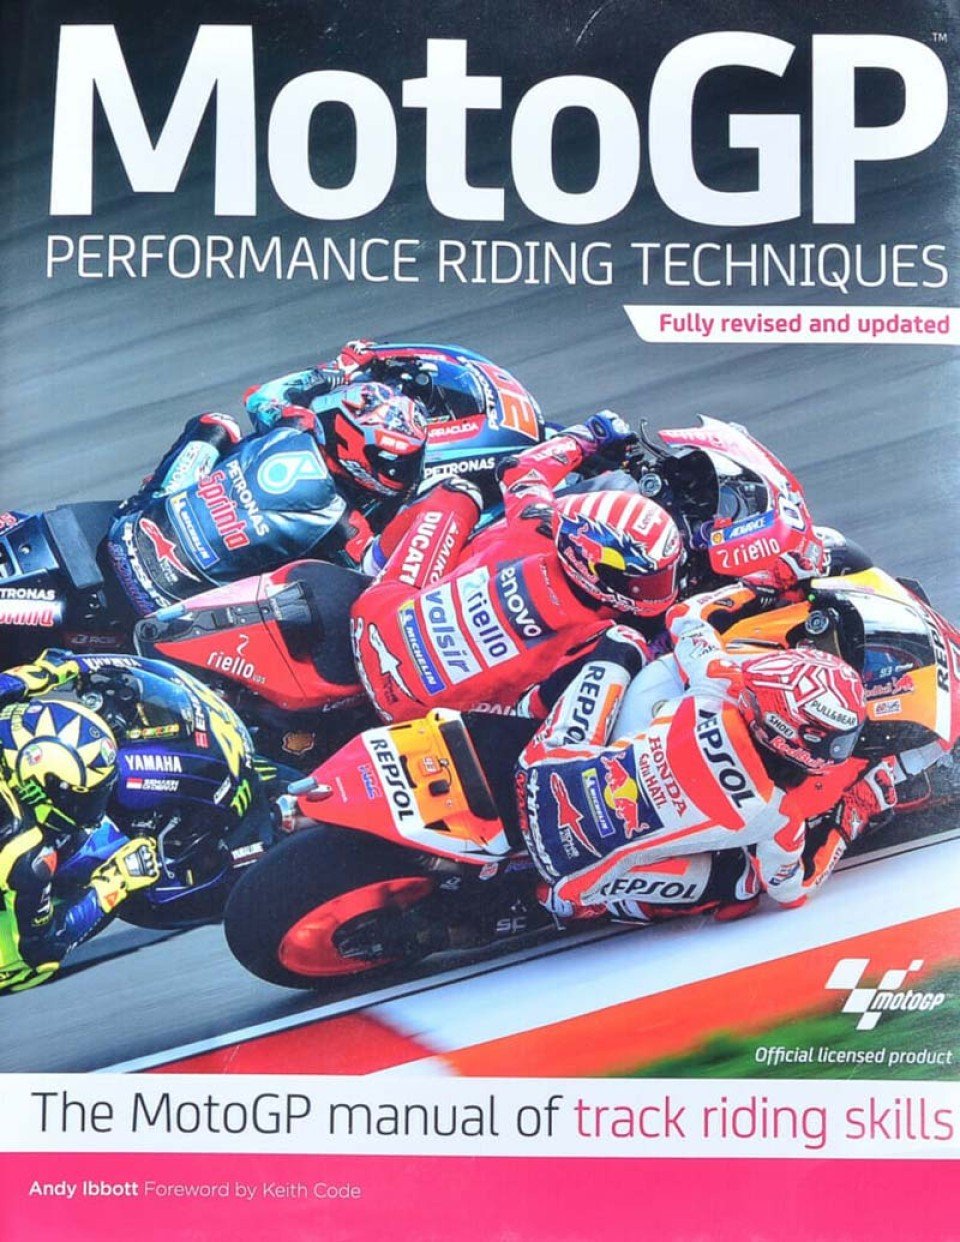 MotoGP: THE BOOK 'MotoGP Performance Riding Techniques': Fast Riding on the Track